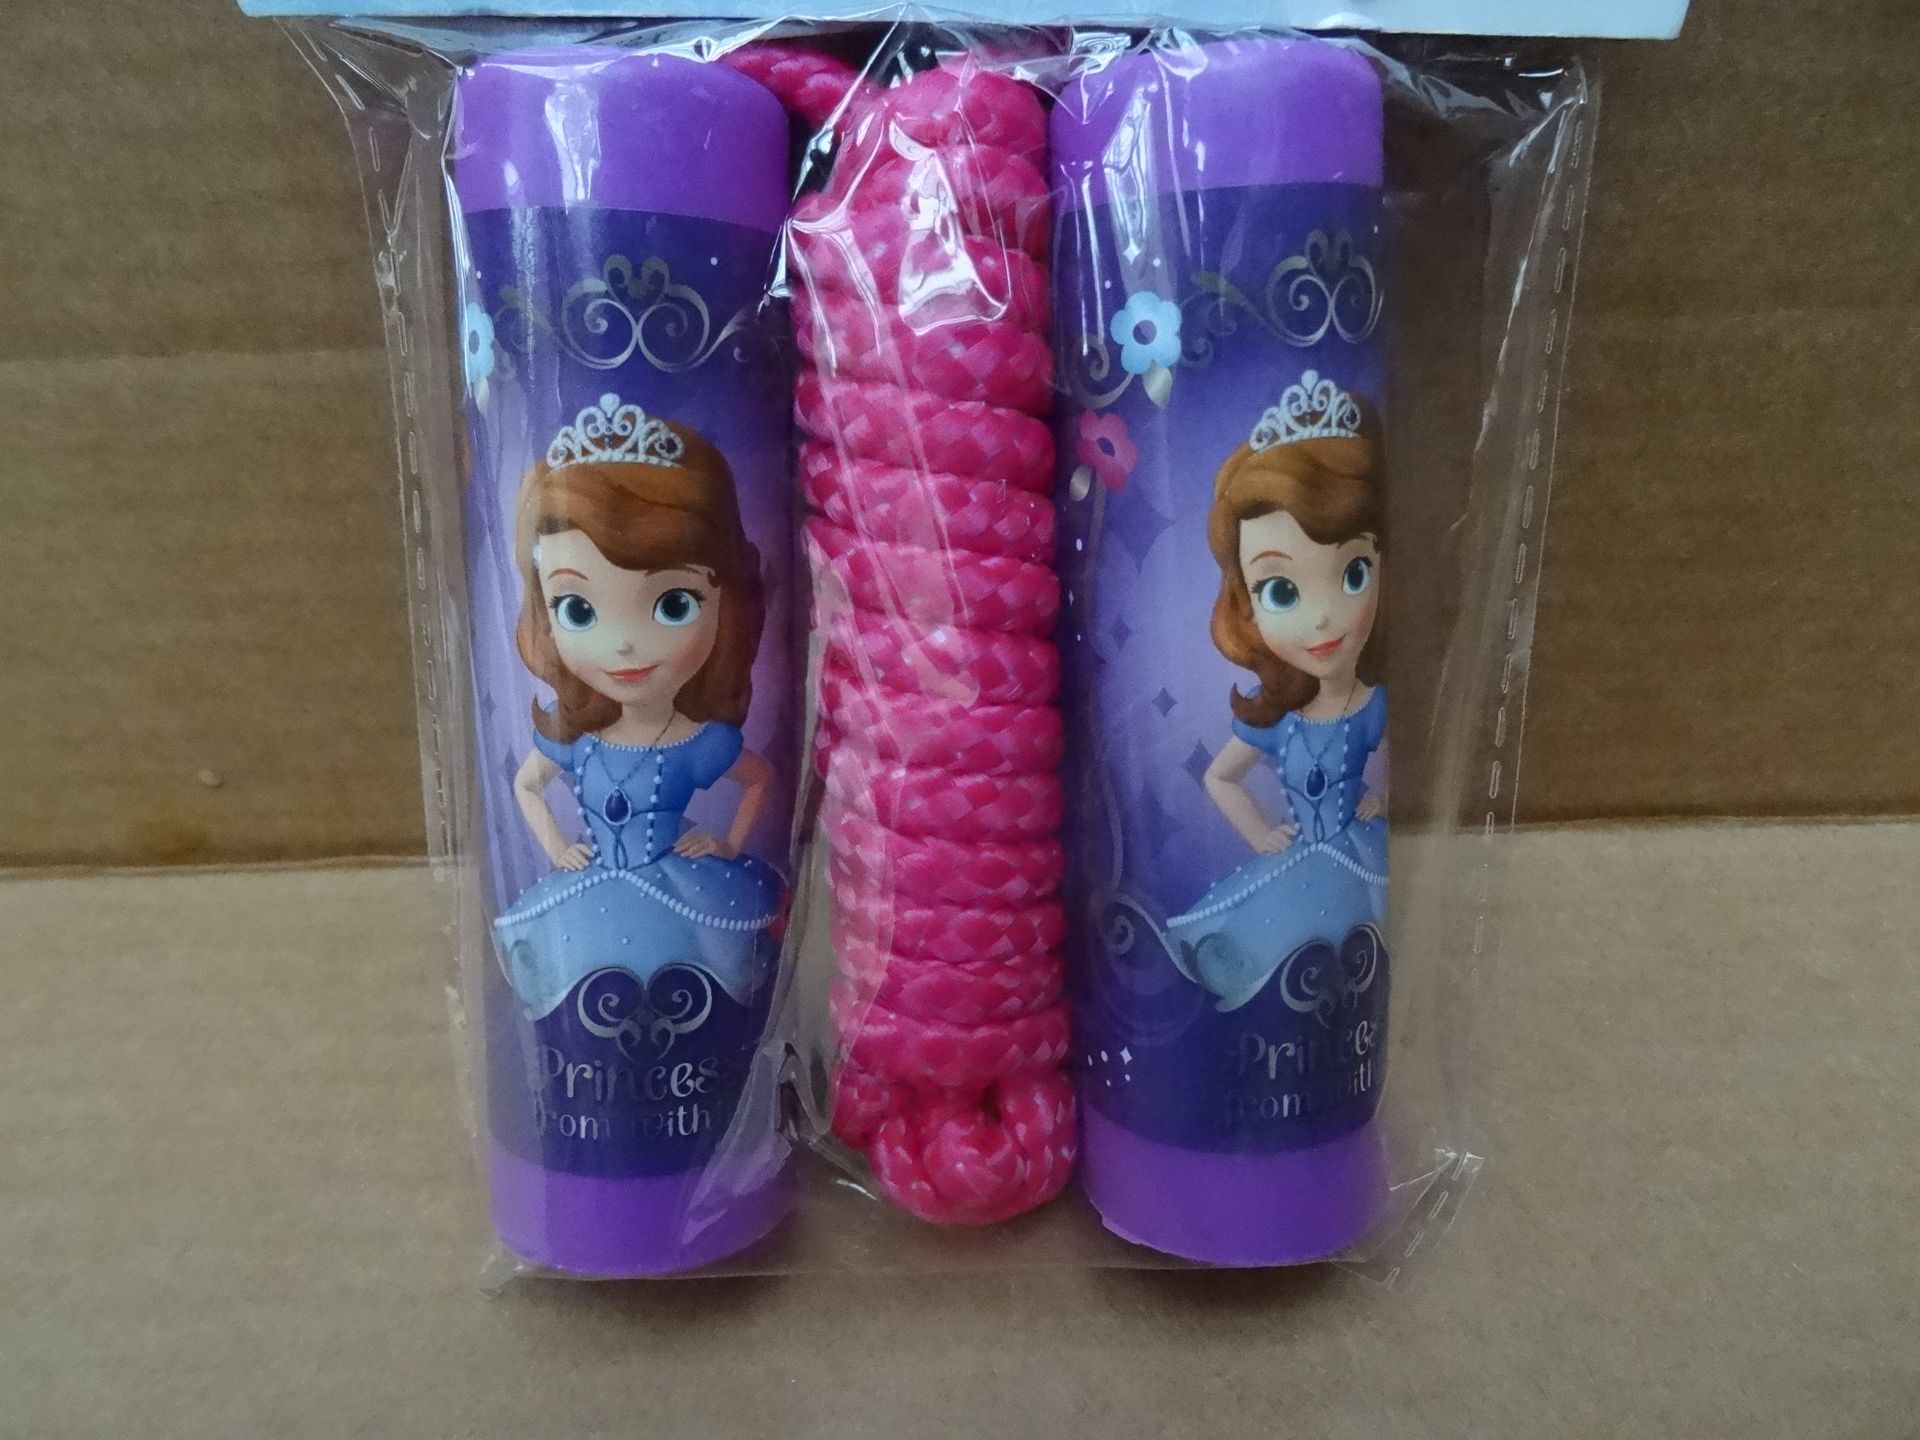 144 x Disney Sofia The First Skipping Rope. Brand new and Packaged. High Quality. Original RRP £4.99 - Image 2 of 2